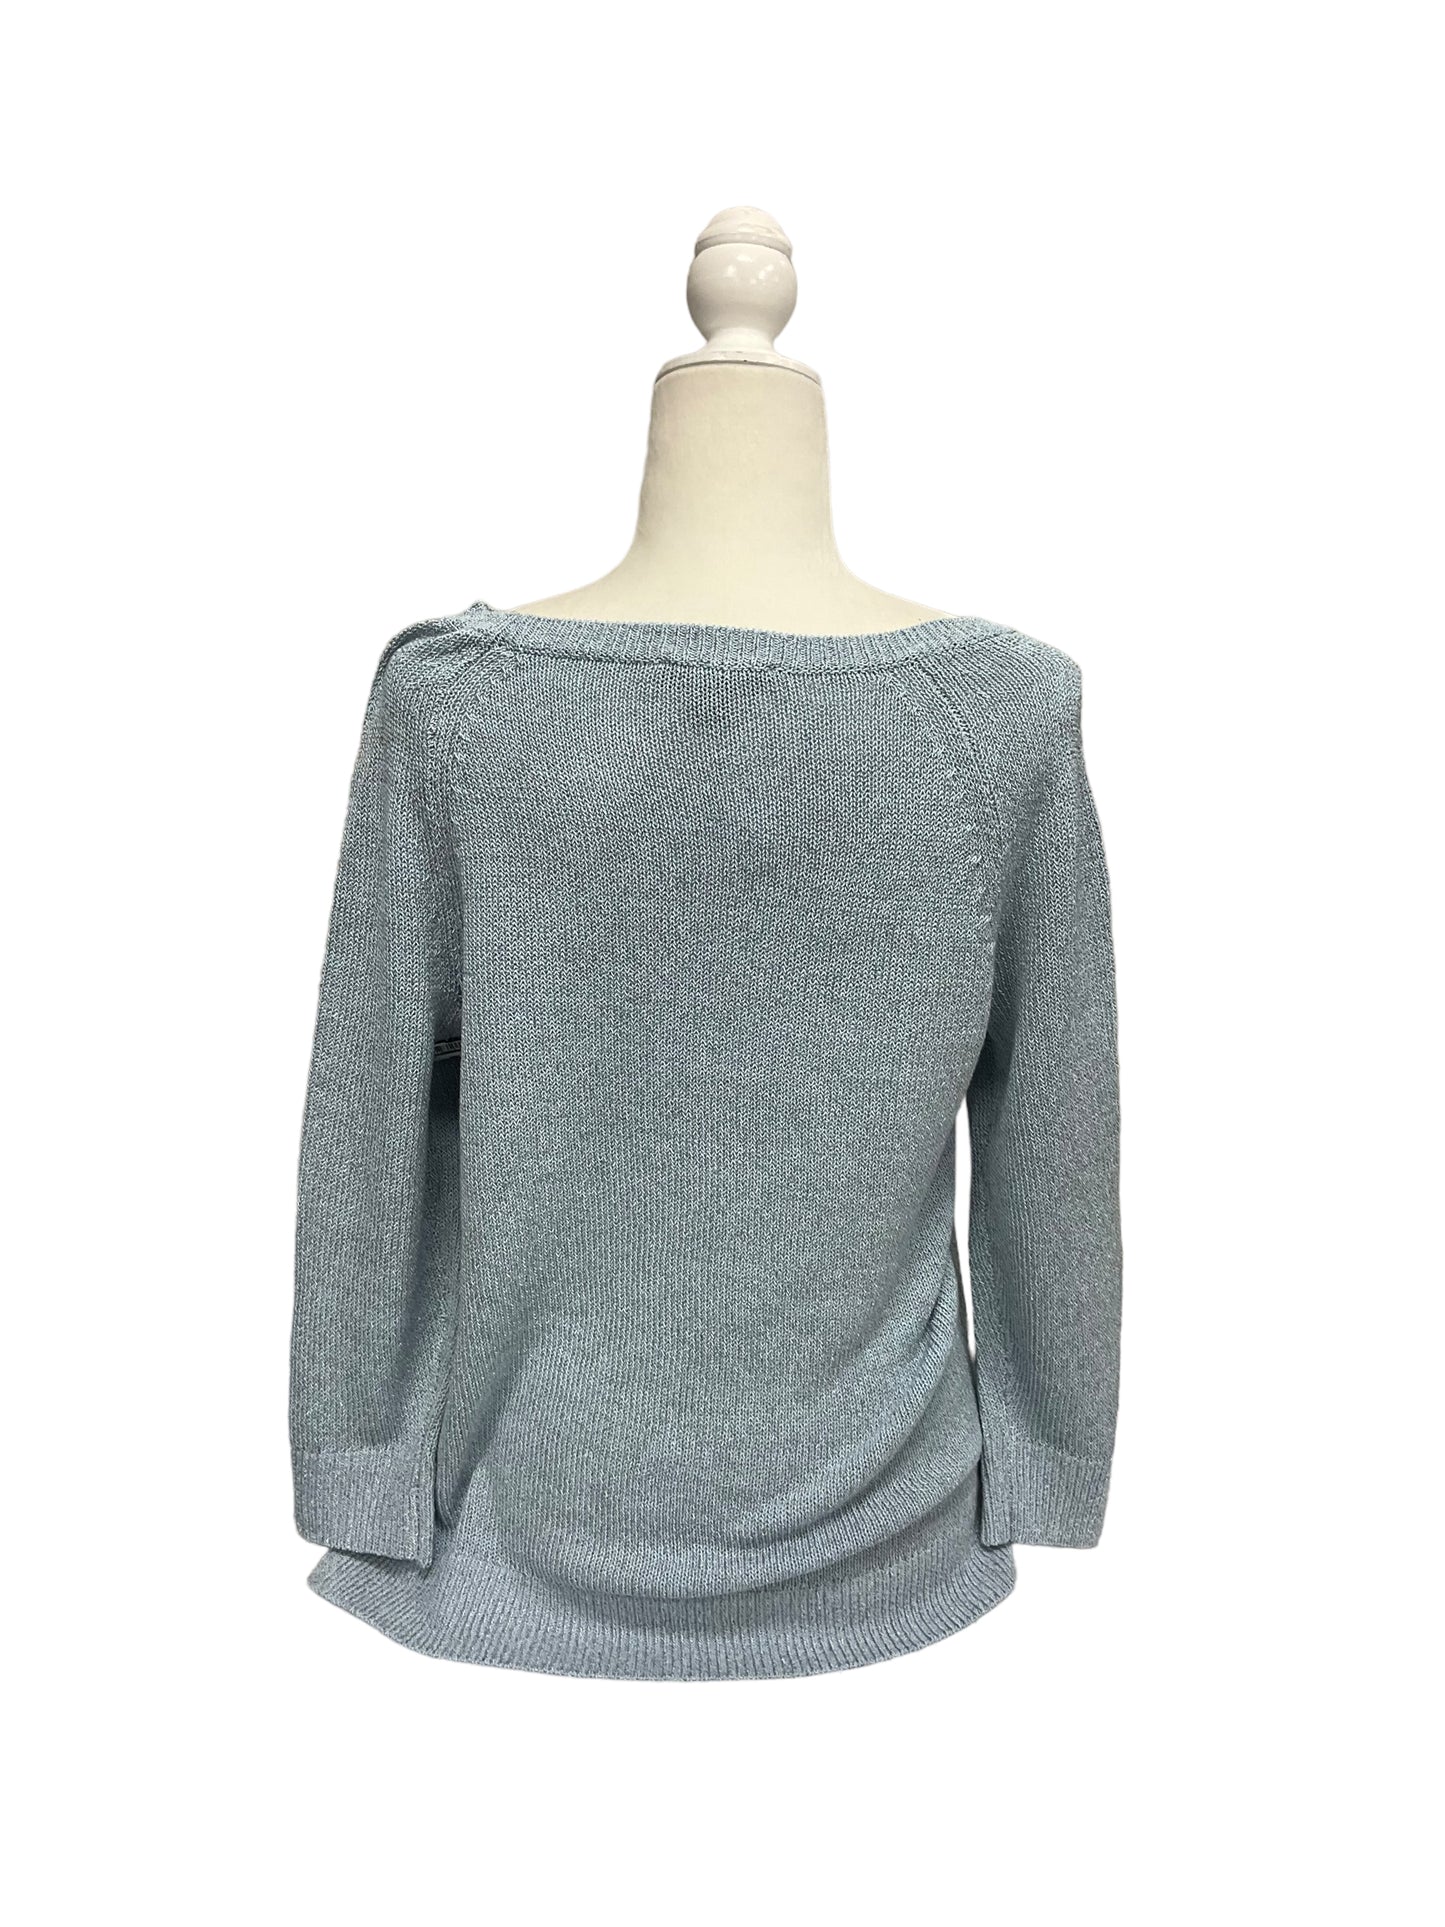 Sweater By Ann Taylor  Size: S